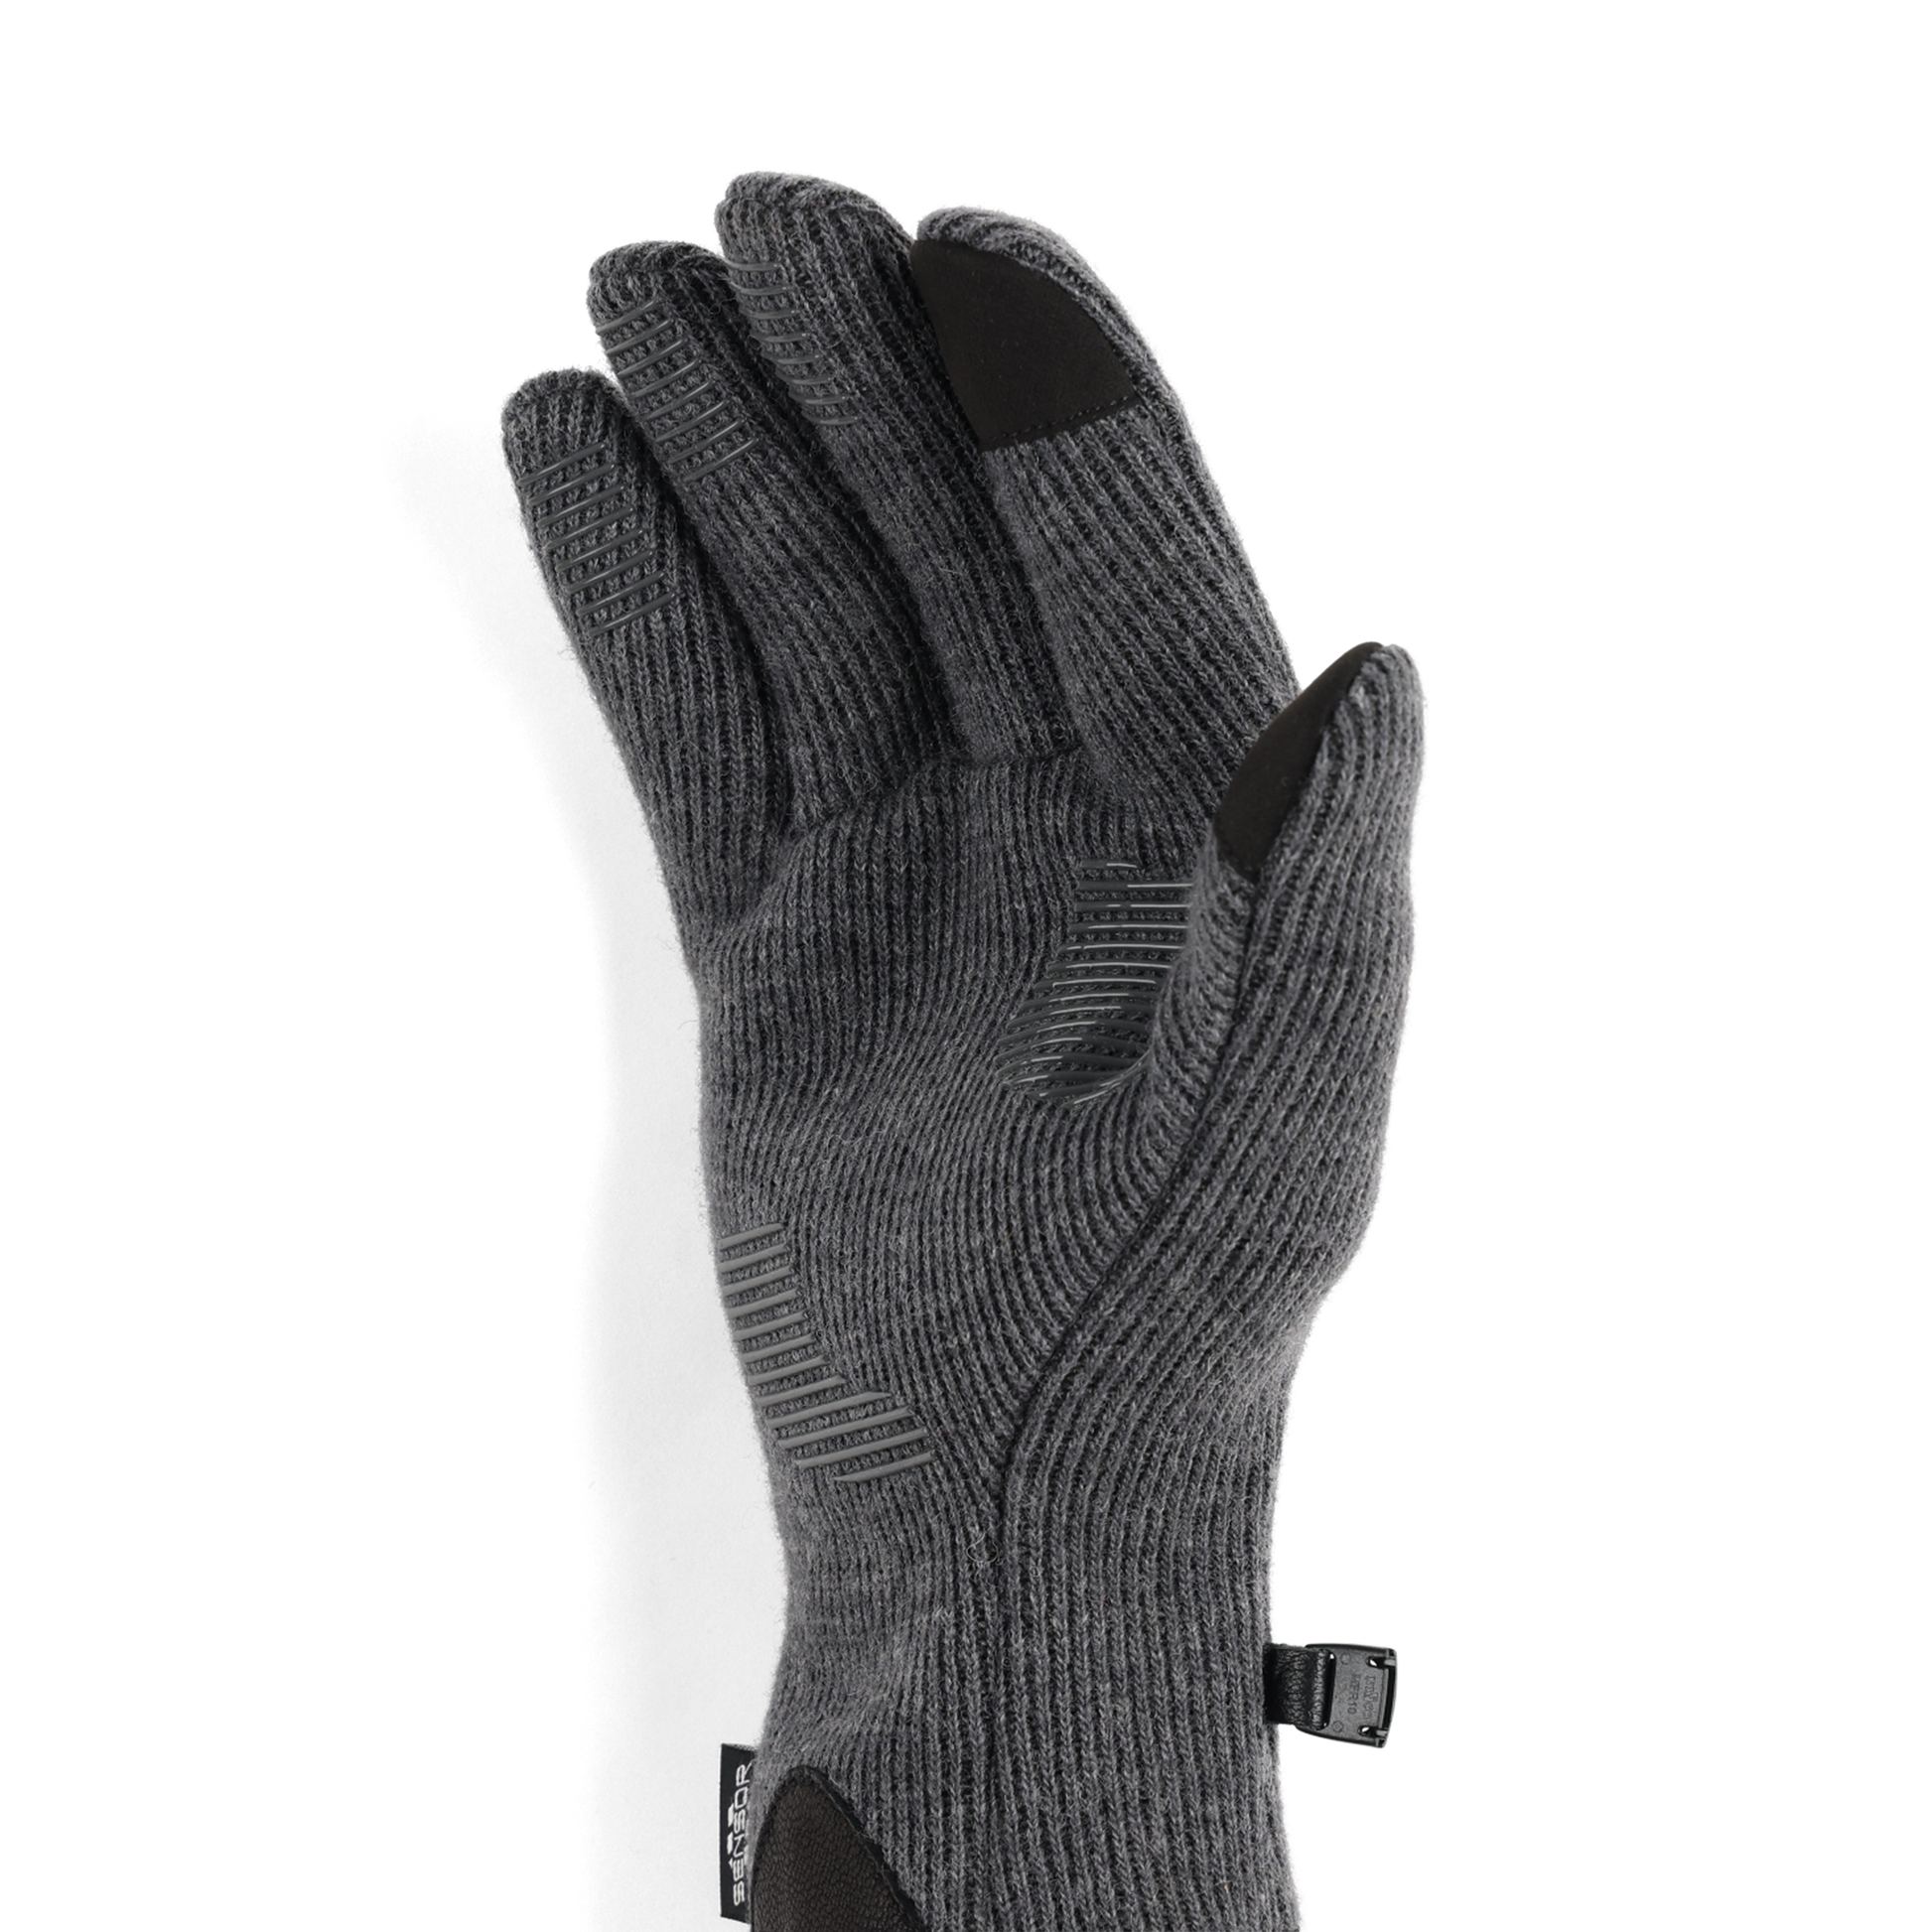 The Heat Company – HEAT 3 SMART Gloves - Soldier Systems Daily